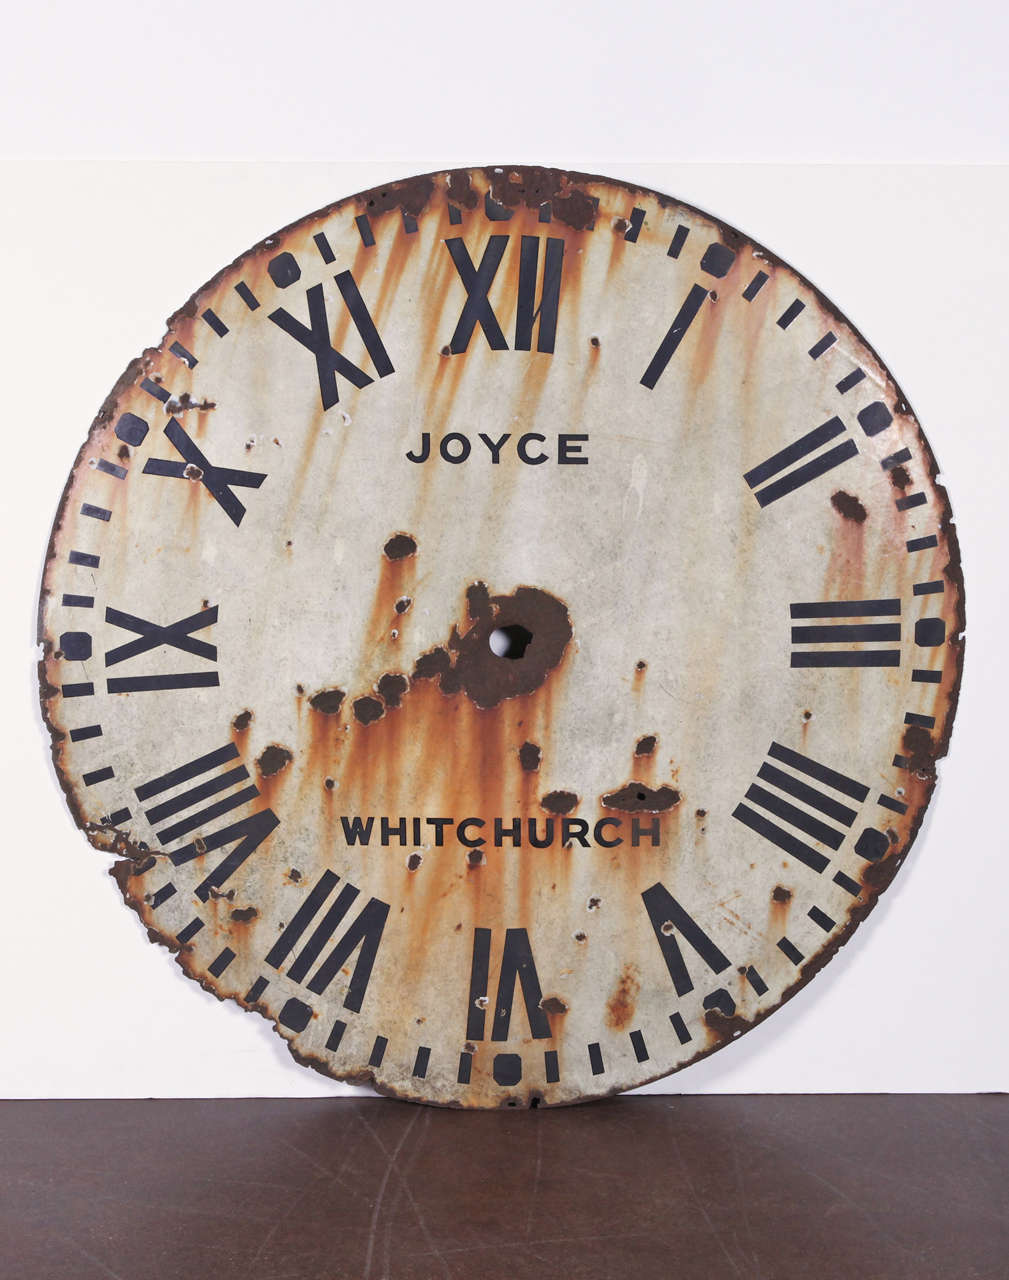 English role clock face.
Antique clock face in original paint patina,
circa 1900.
Can be placed indoor or outdoor.

The clock is from J. B. Joyce & Co, claim to be the oldest clock manufacturer in the world, originally established in 1690. The